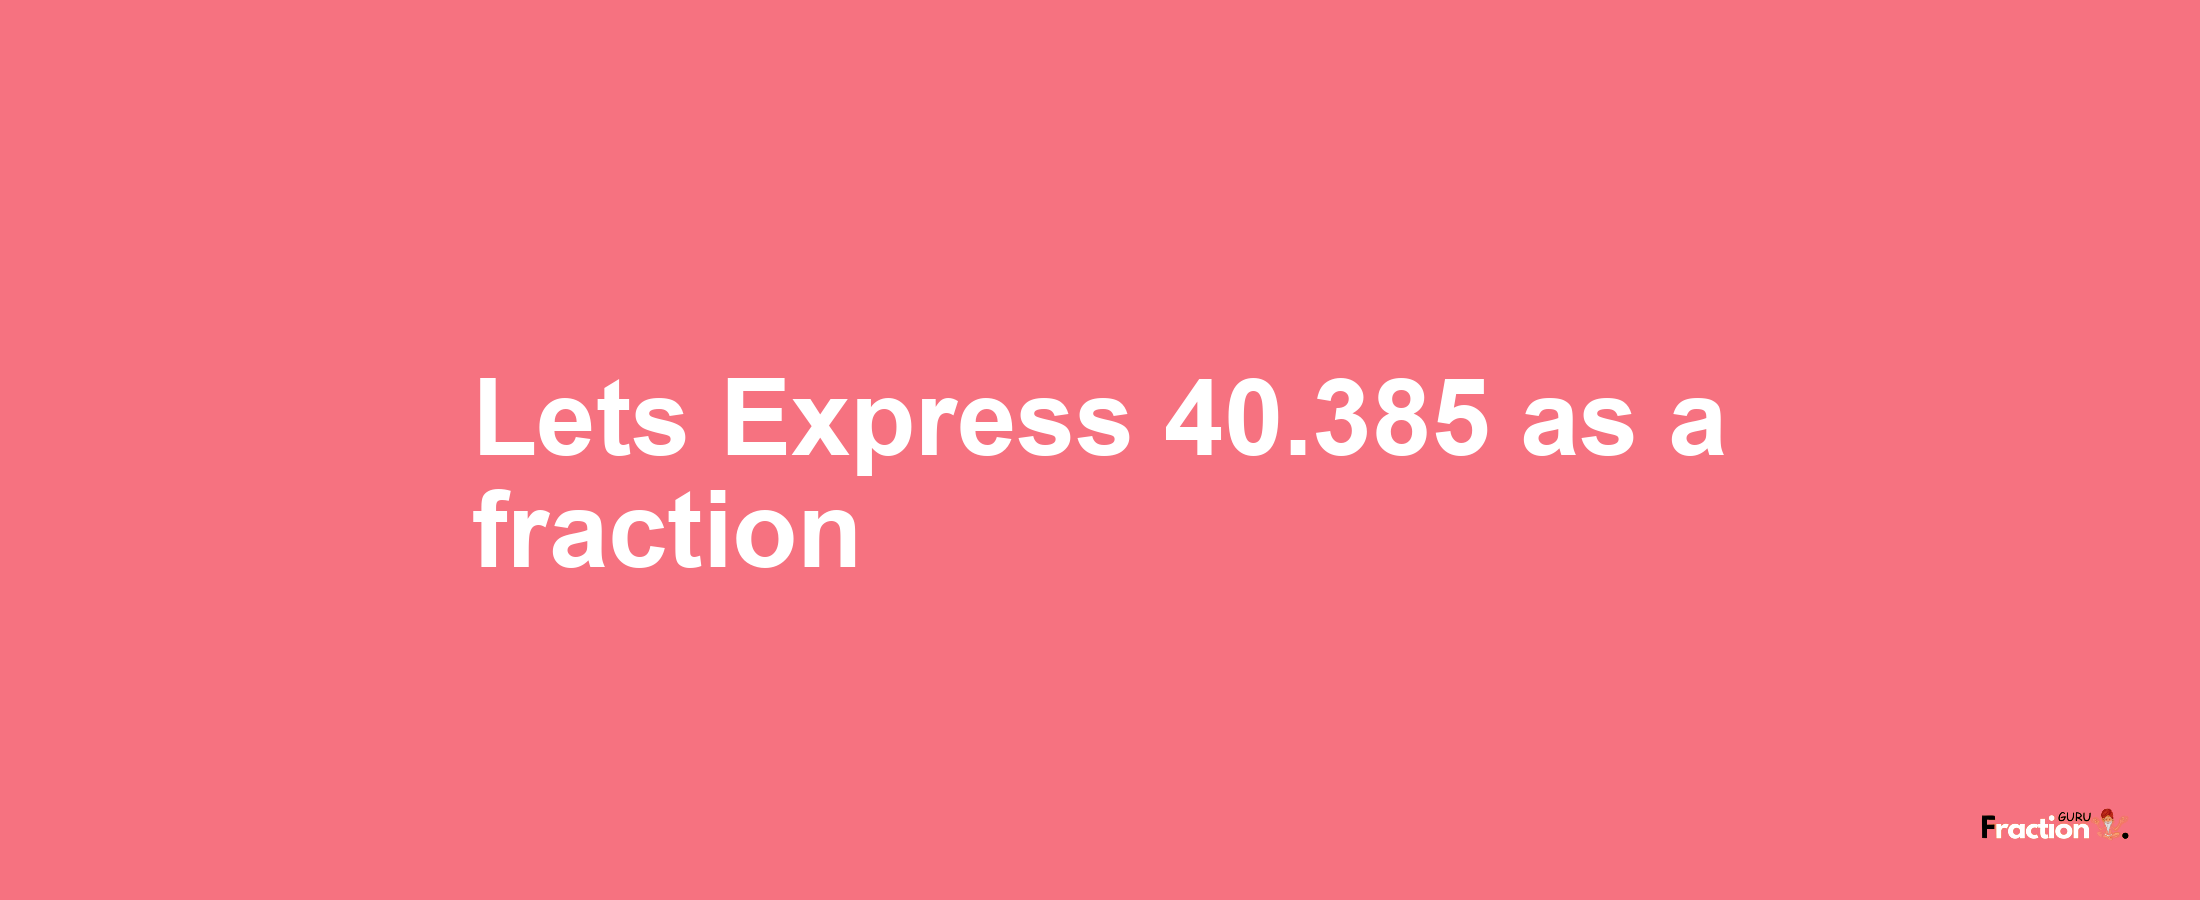 Lets Express 40.385 as afraction